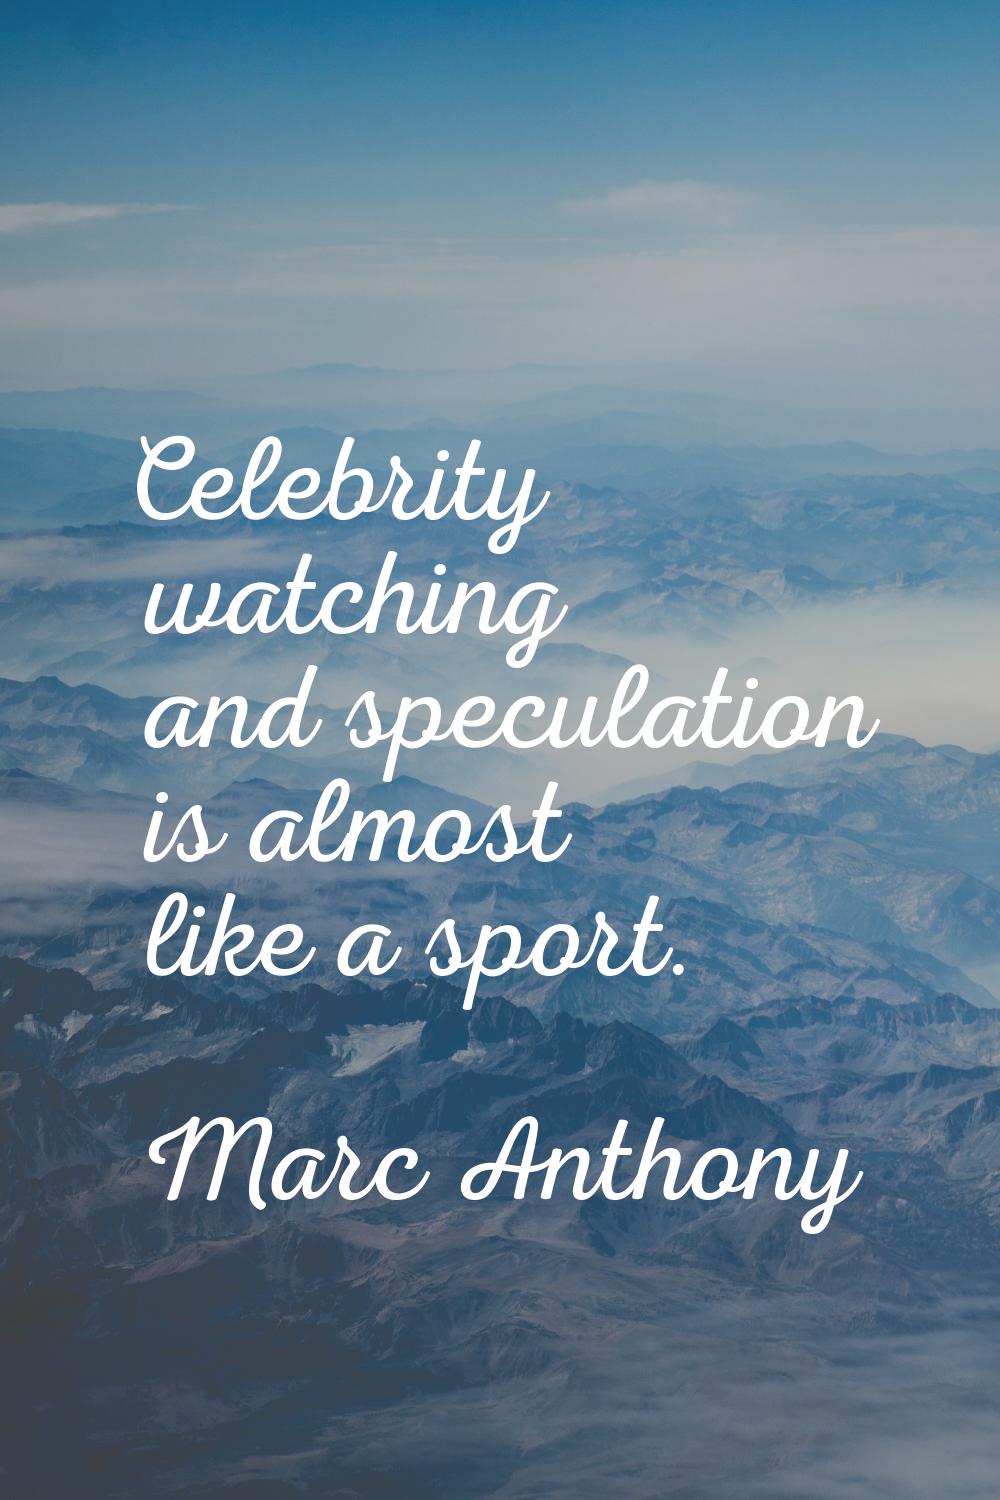 Celebrity watching and speculation is almost like a sport.